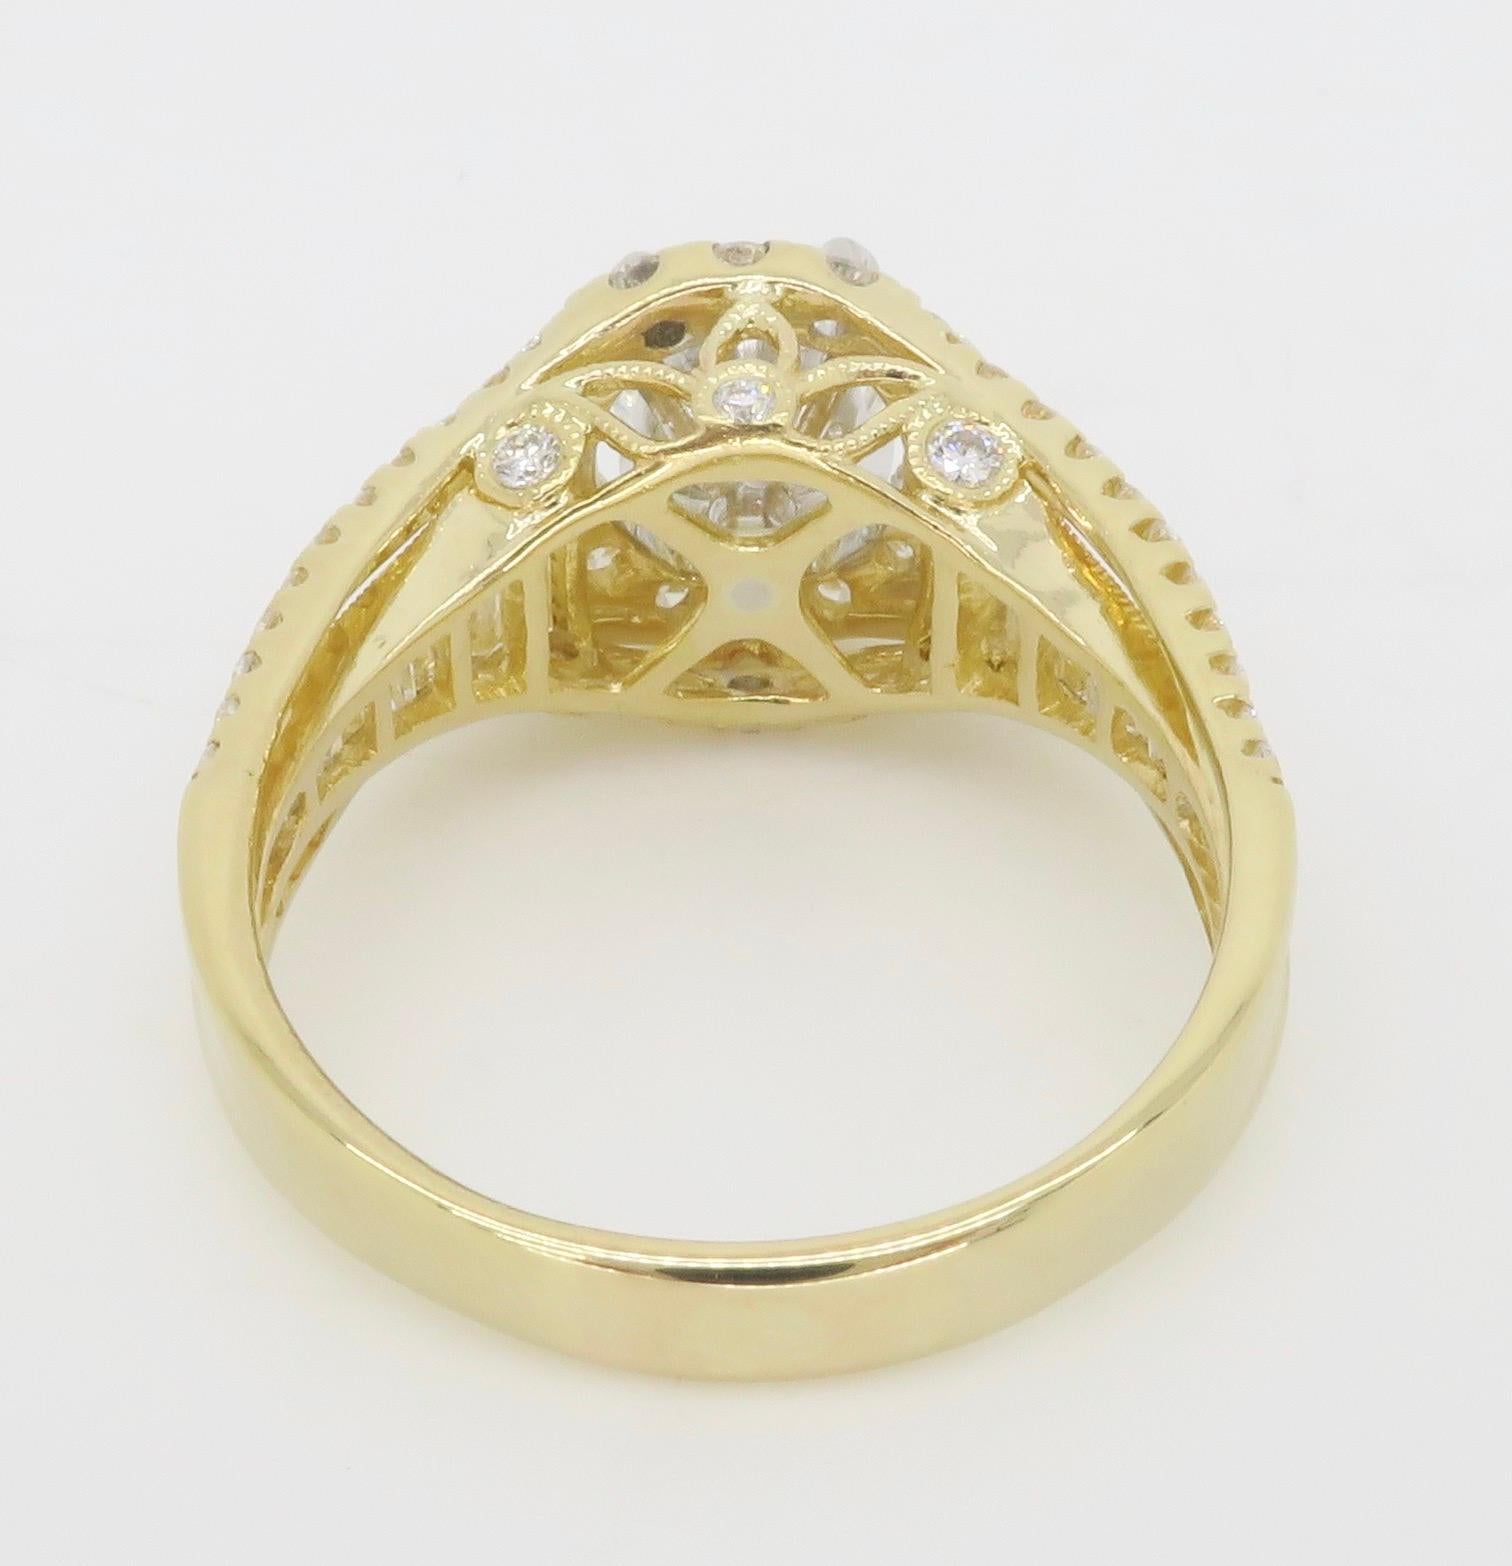 2.04CTW Diamond Engagement Ring in 14k Yellow Gold For Sale 5